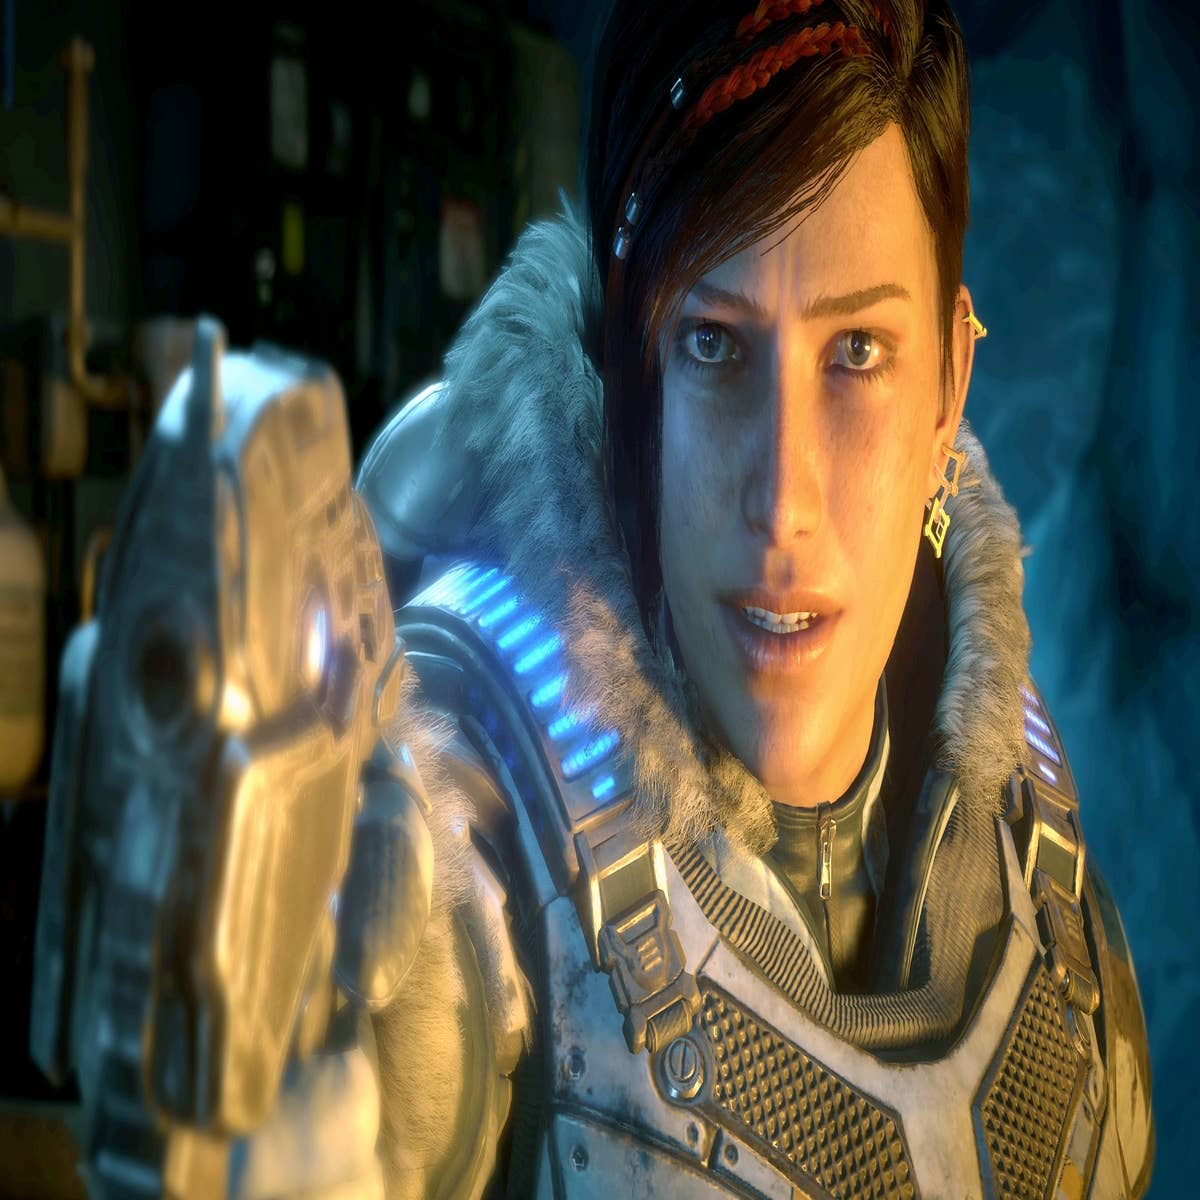 Microsoft Just Announced Gears 5 for Xbox One